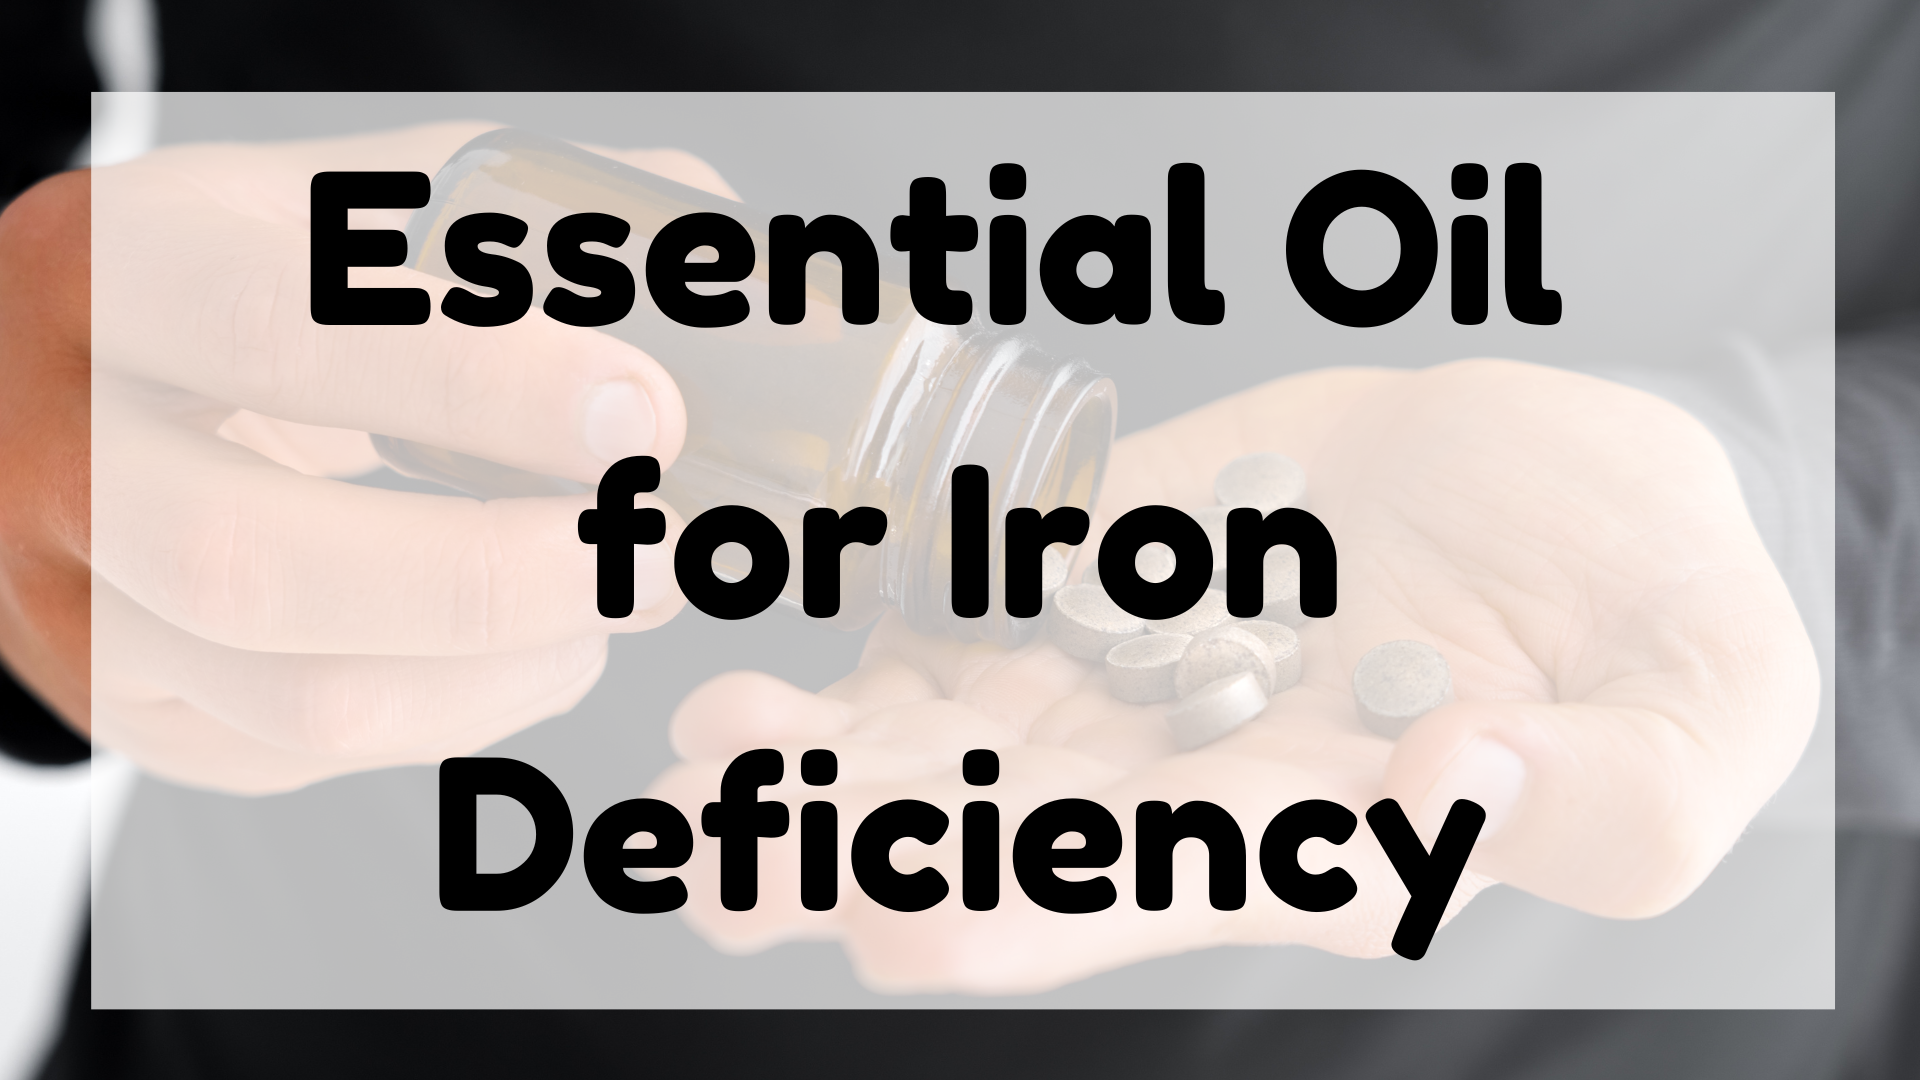 Essential Oil for Iron Deficiency featured image